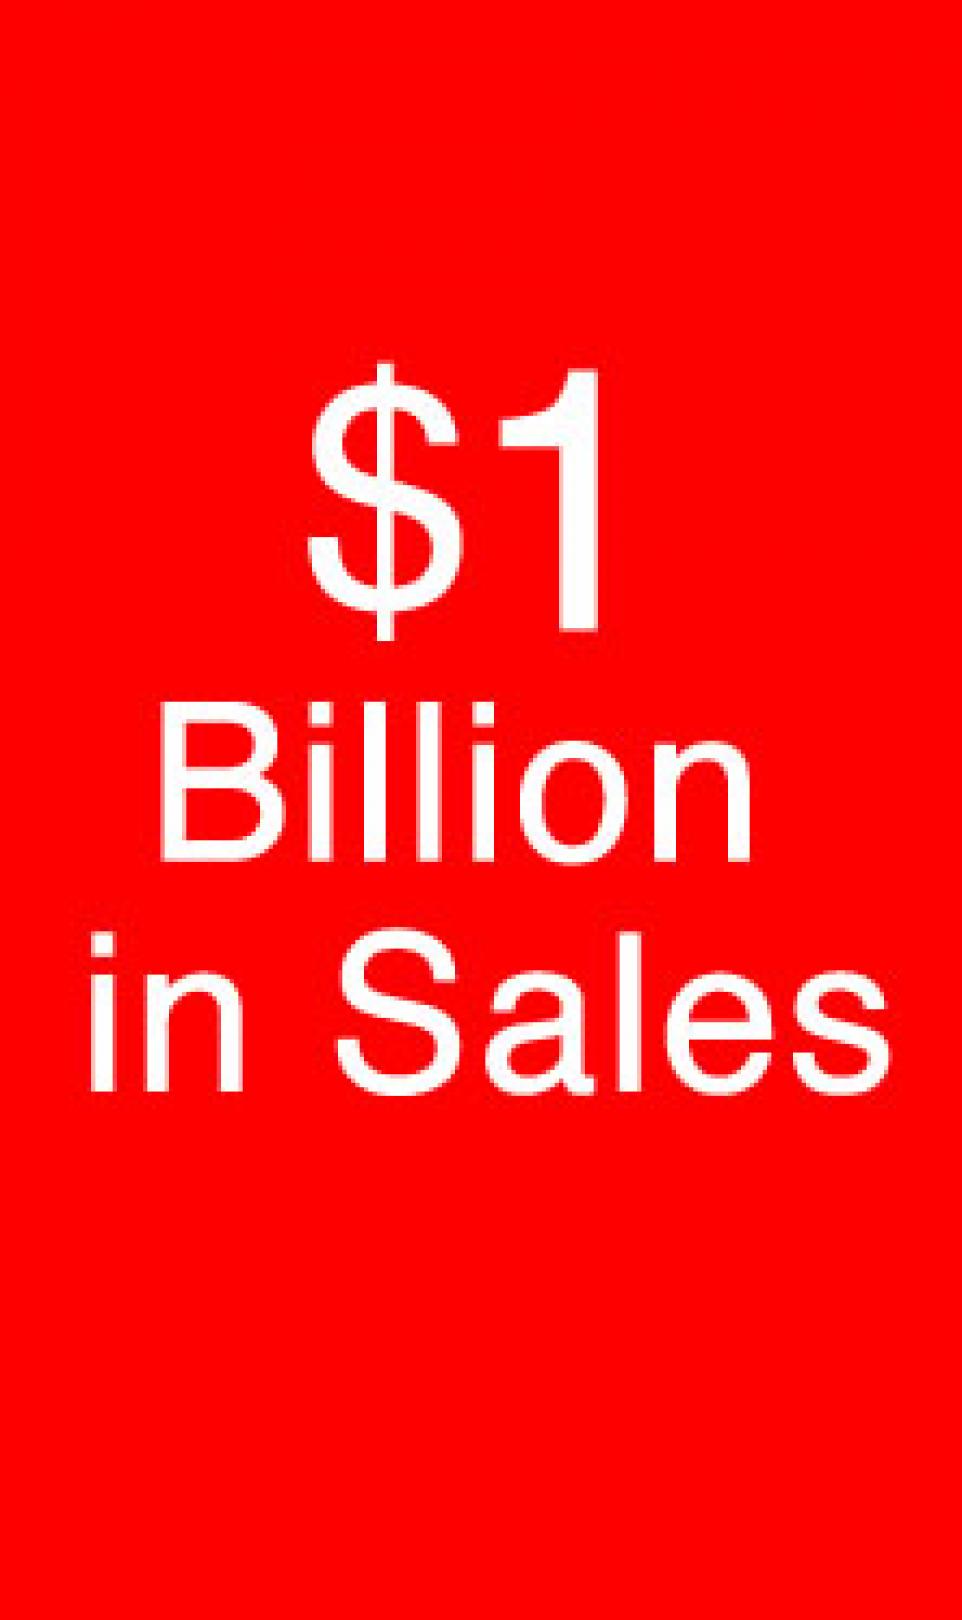 Red poster with "$1 Billion in Sales" in big white letters